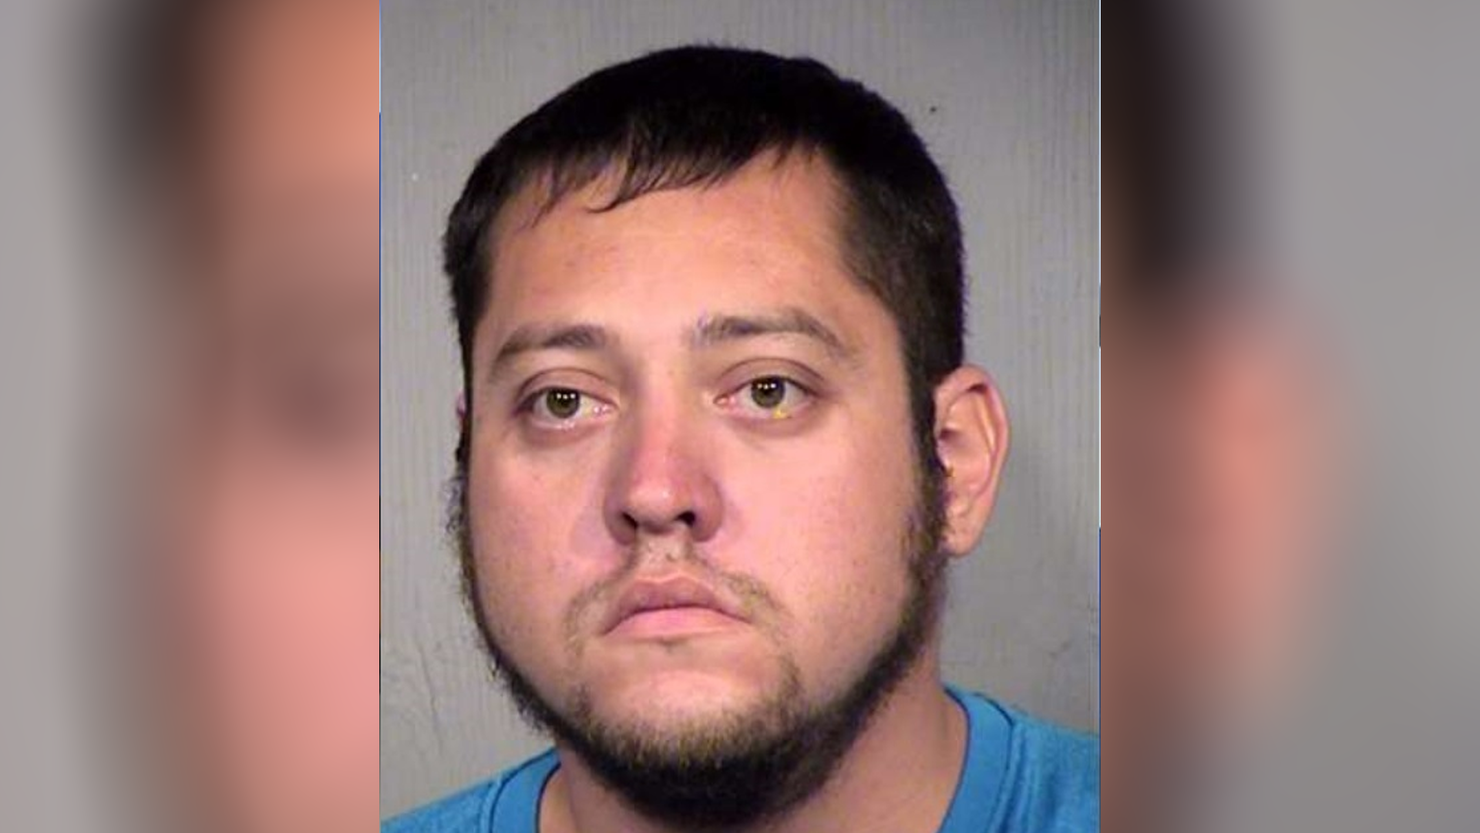 Gilbert arizona man arrested after pretending to have Down's syndrome